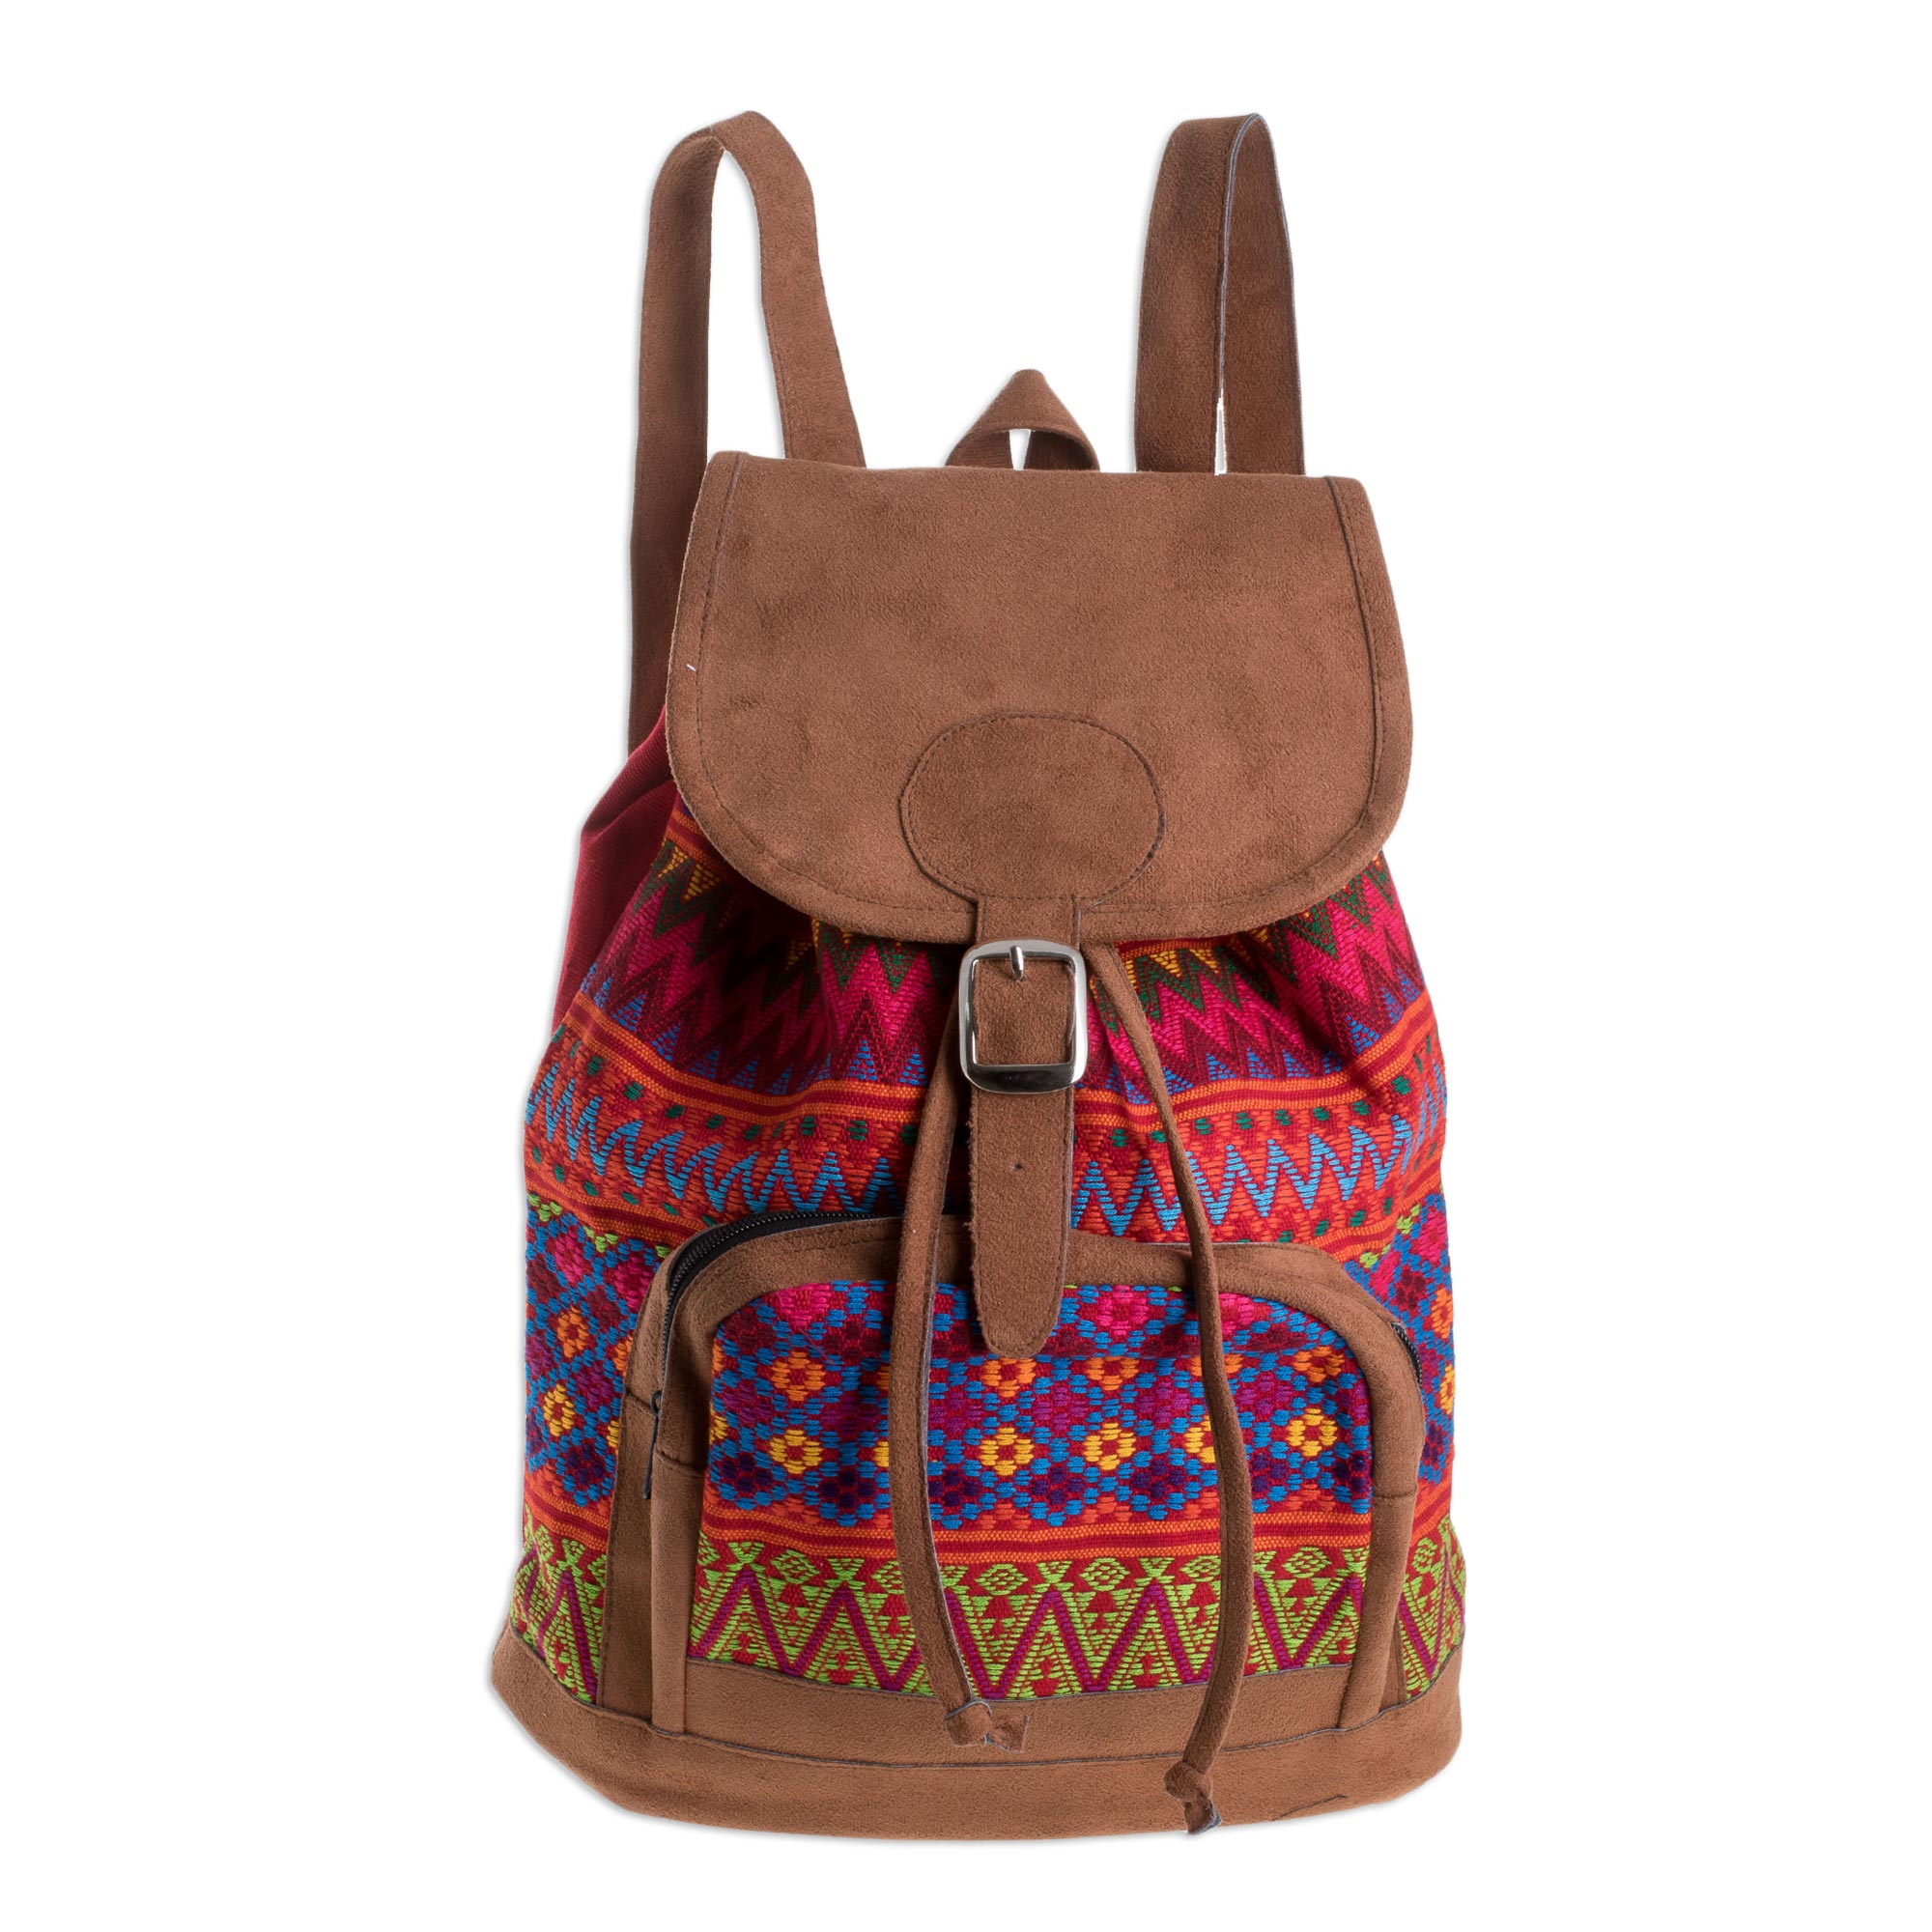 Zigzag Motif Handwoven Cotton Backpack from Guatemala - Flowers of ...